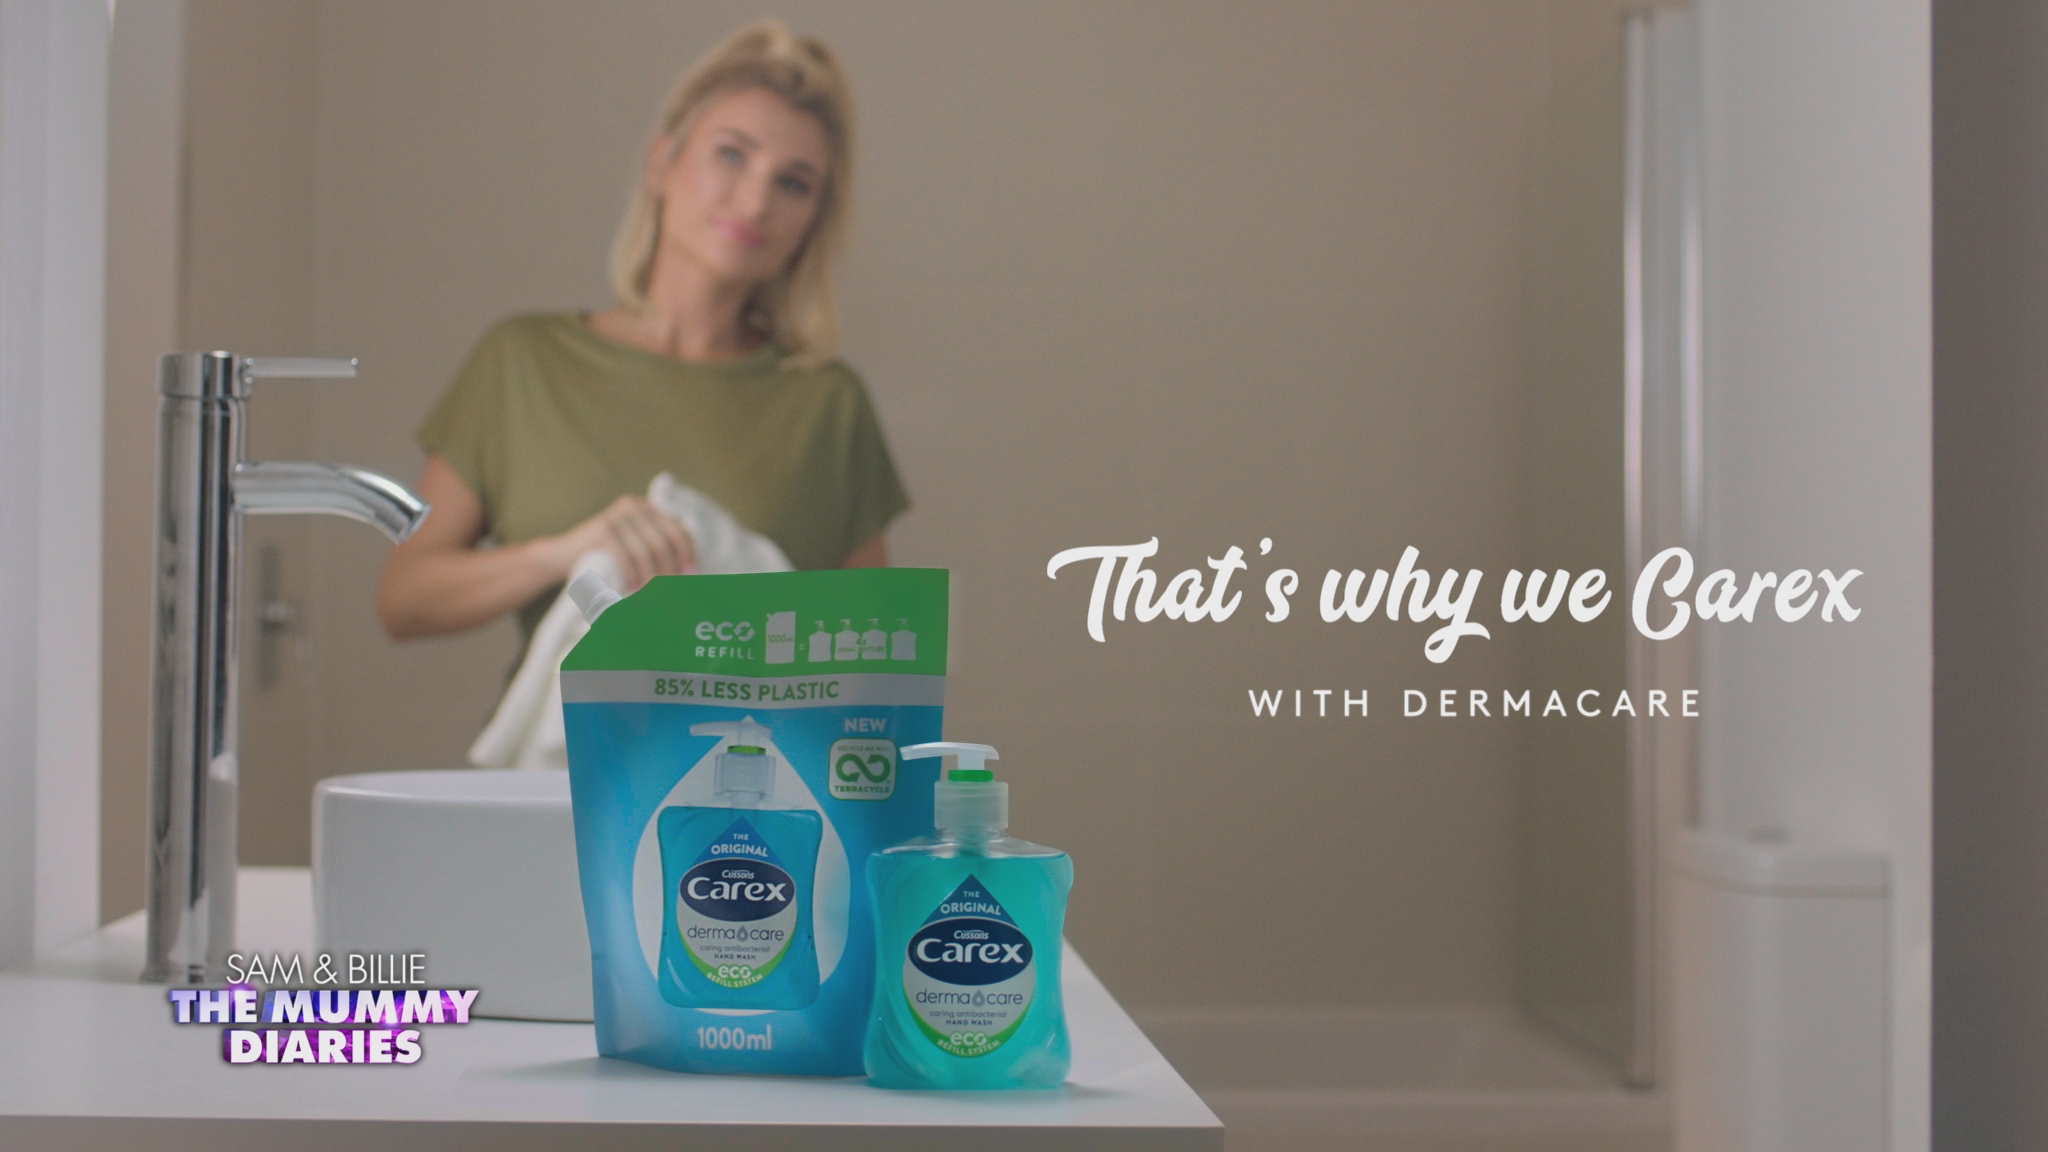 Wavemaker Launches 'Mummy Diaries' for Carex featuring Sam & Billie Faiers